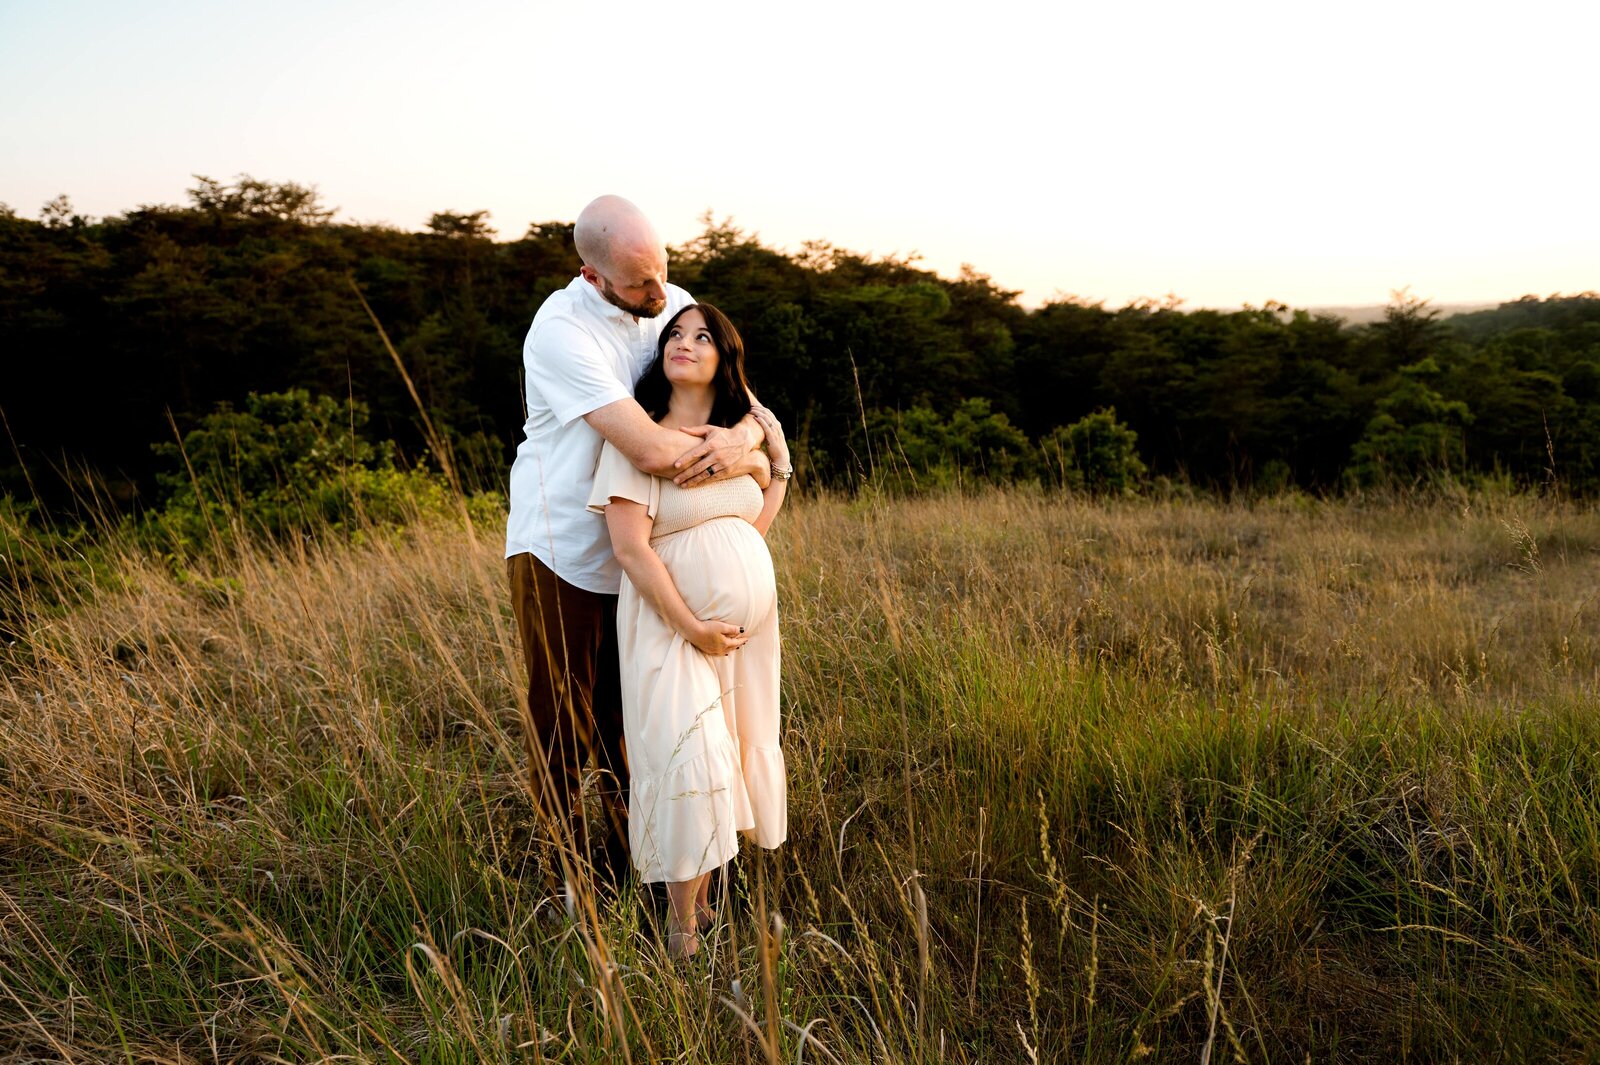 maternity photography session at Soldiers Delight in Owings Mills, Marland